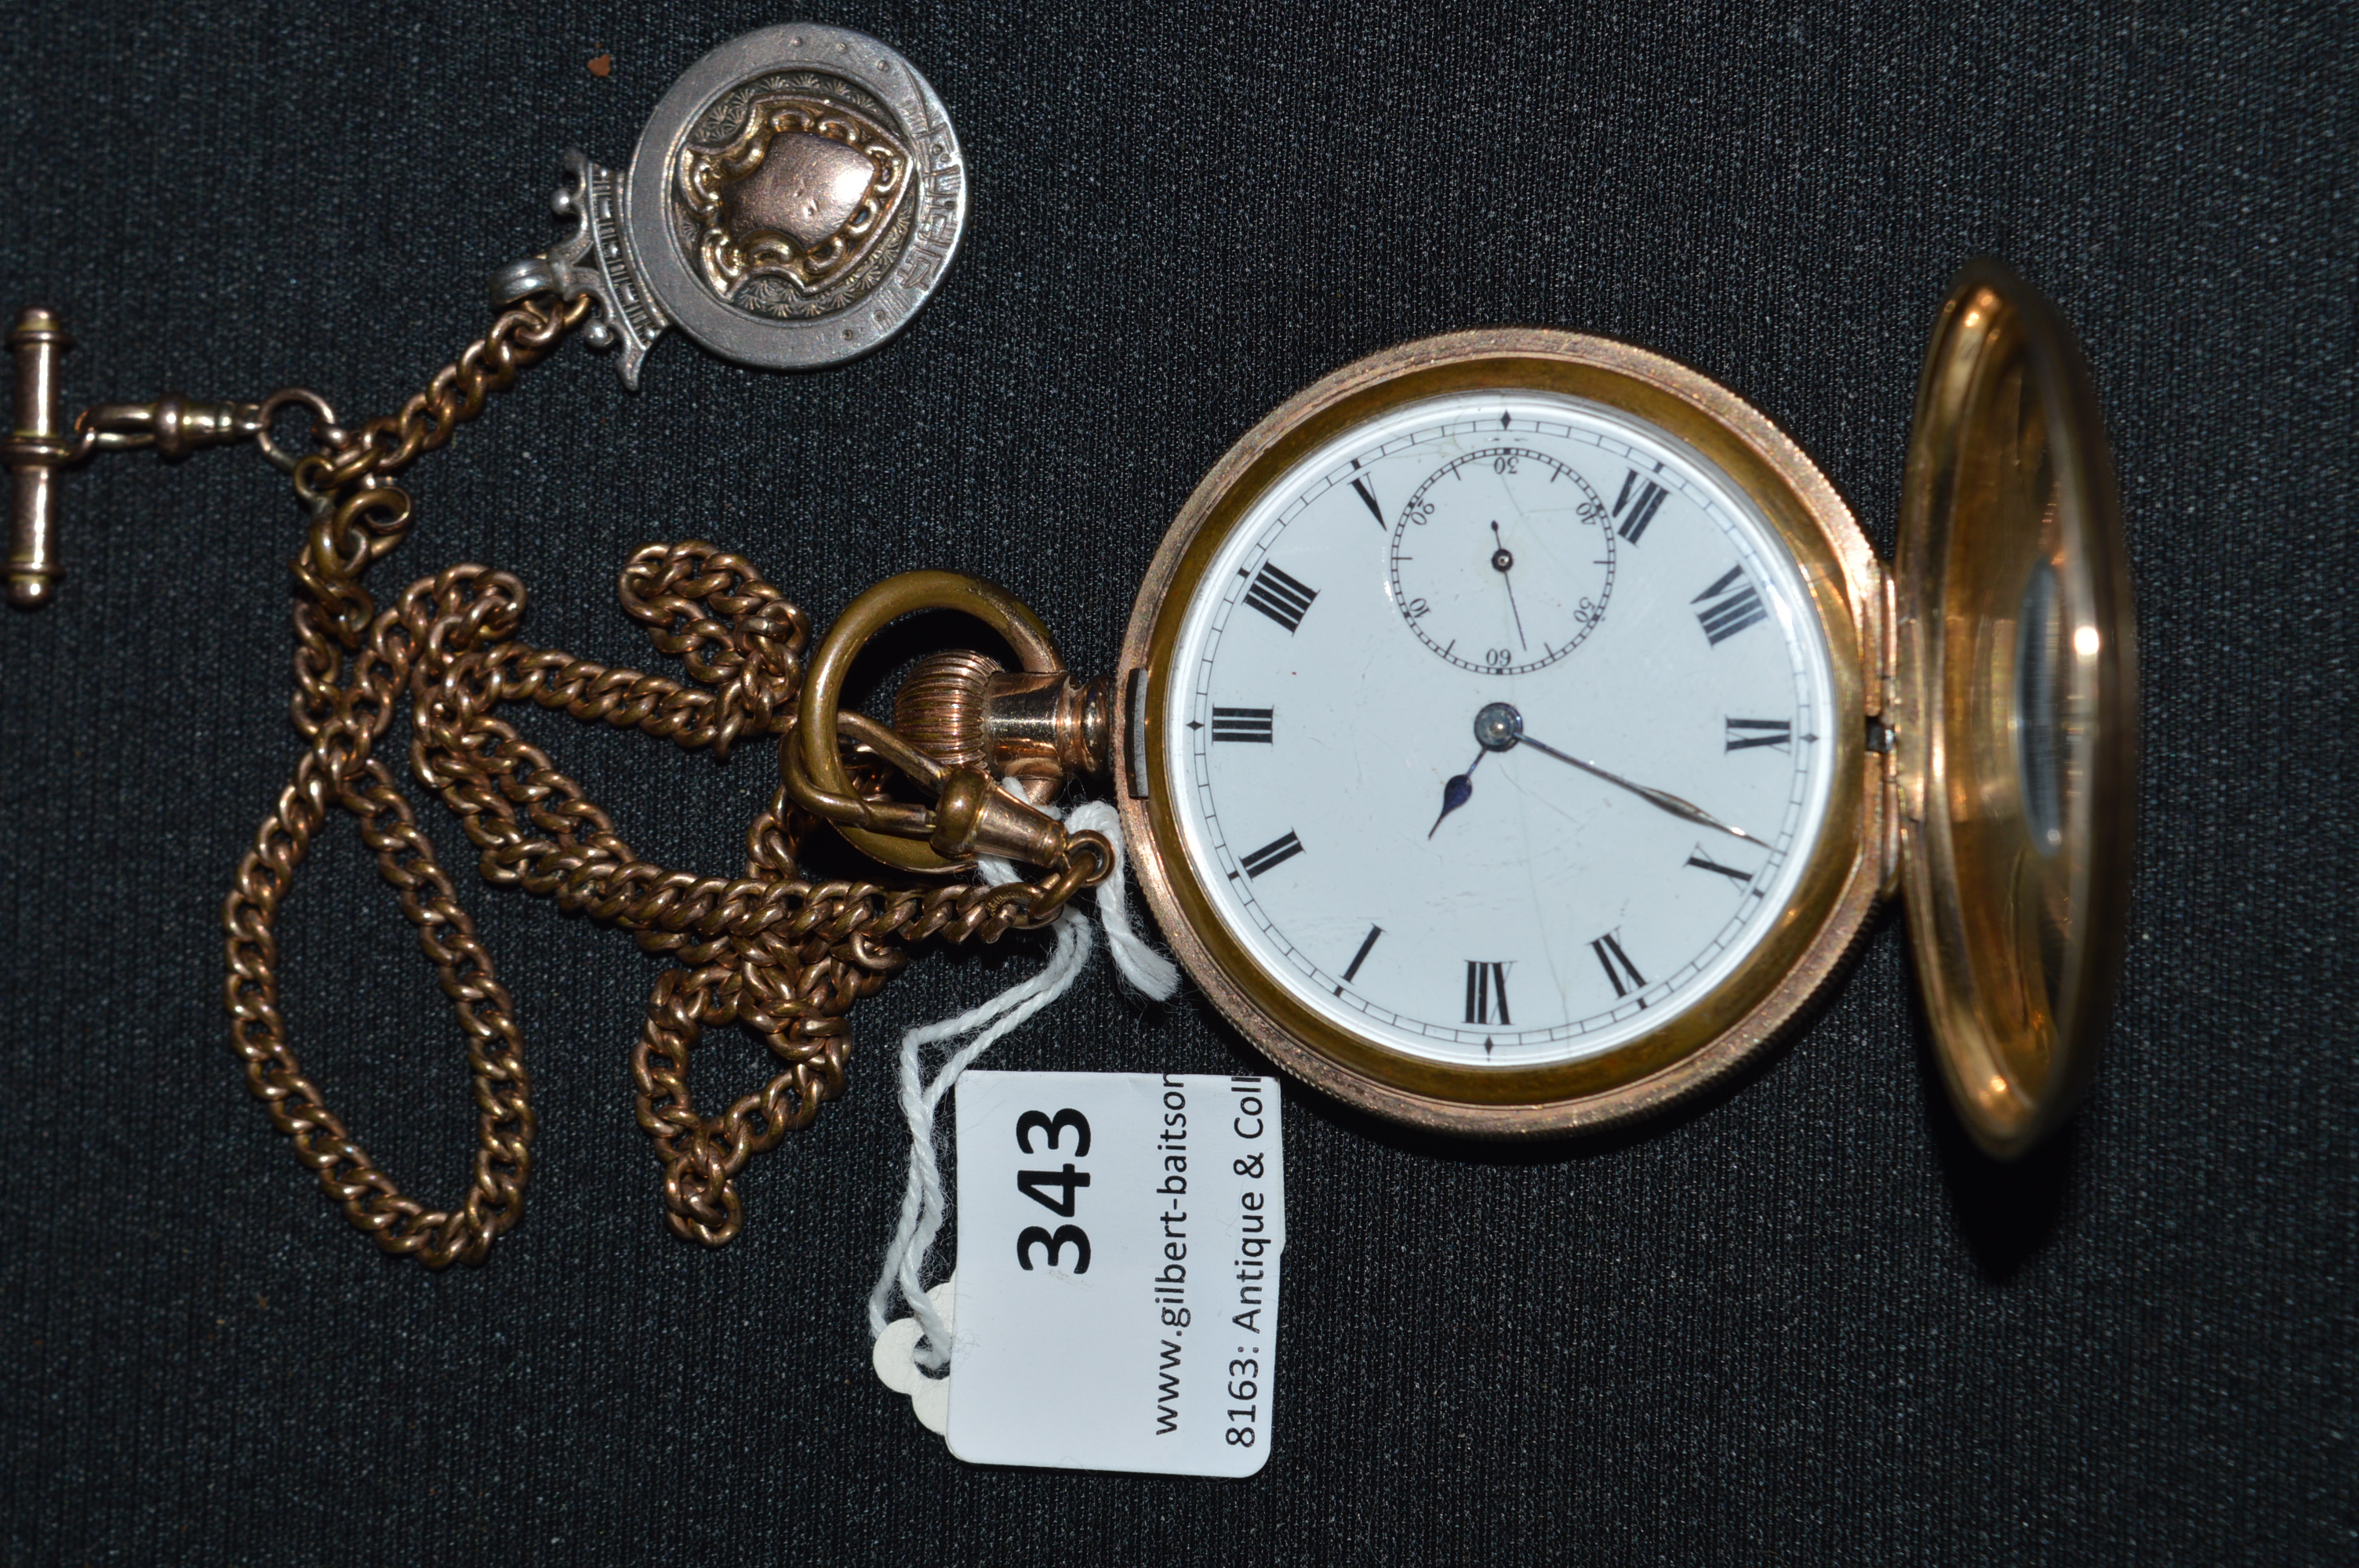 ALD English Gold Plated Pocket Watch plus Silver Fob - Image 2 of 2